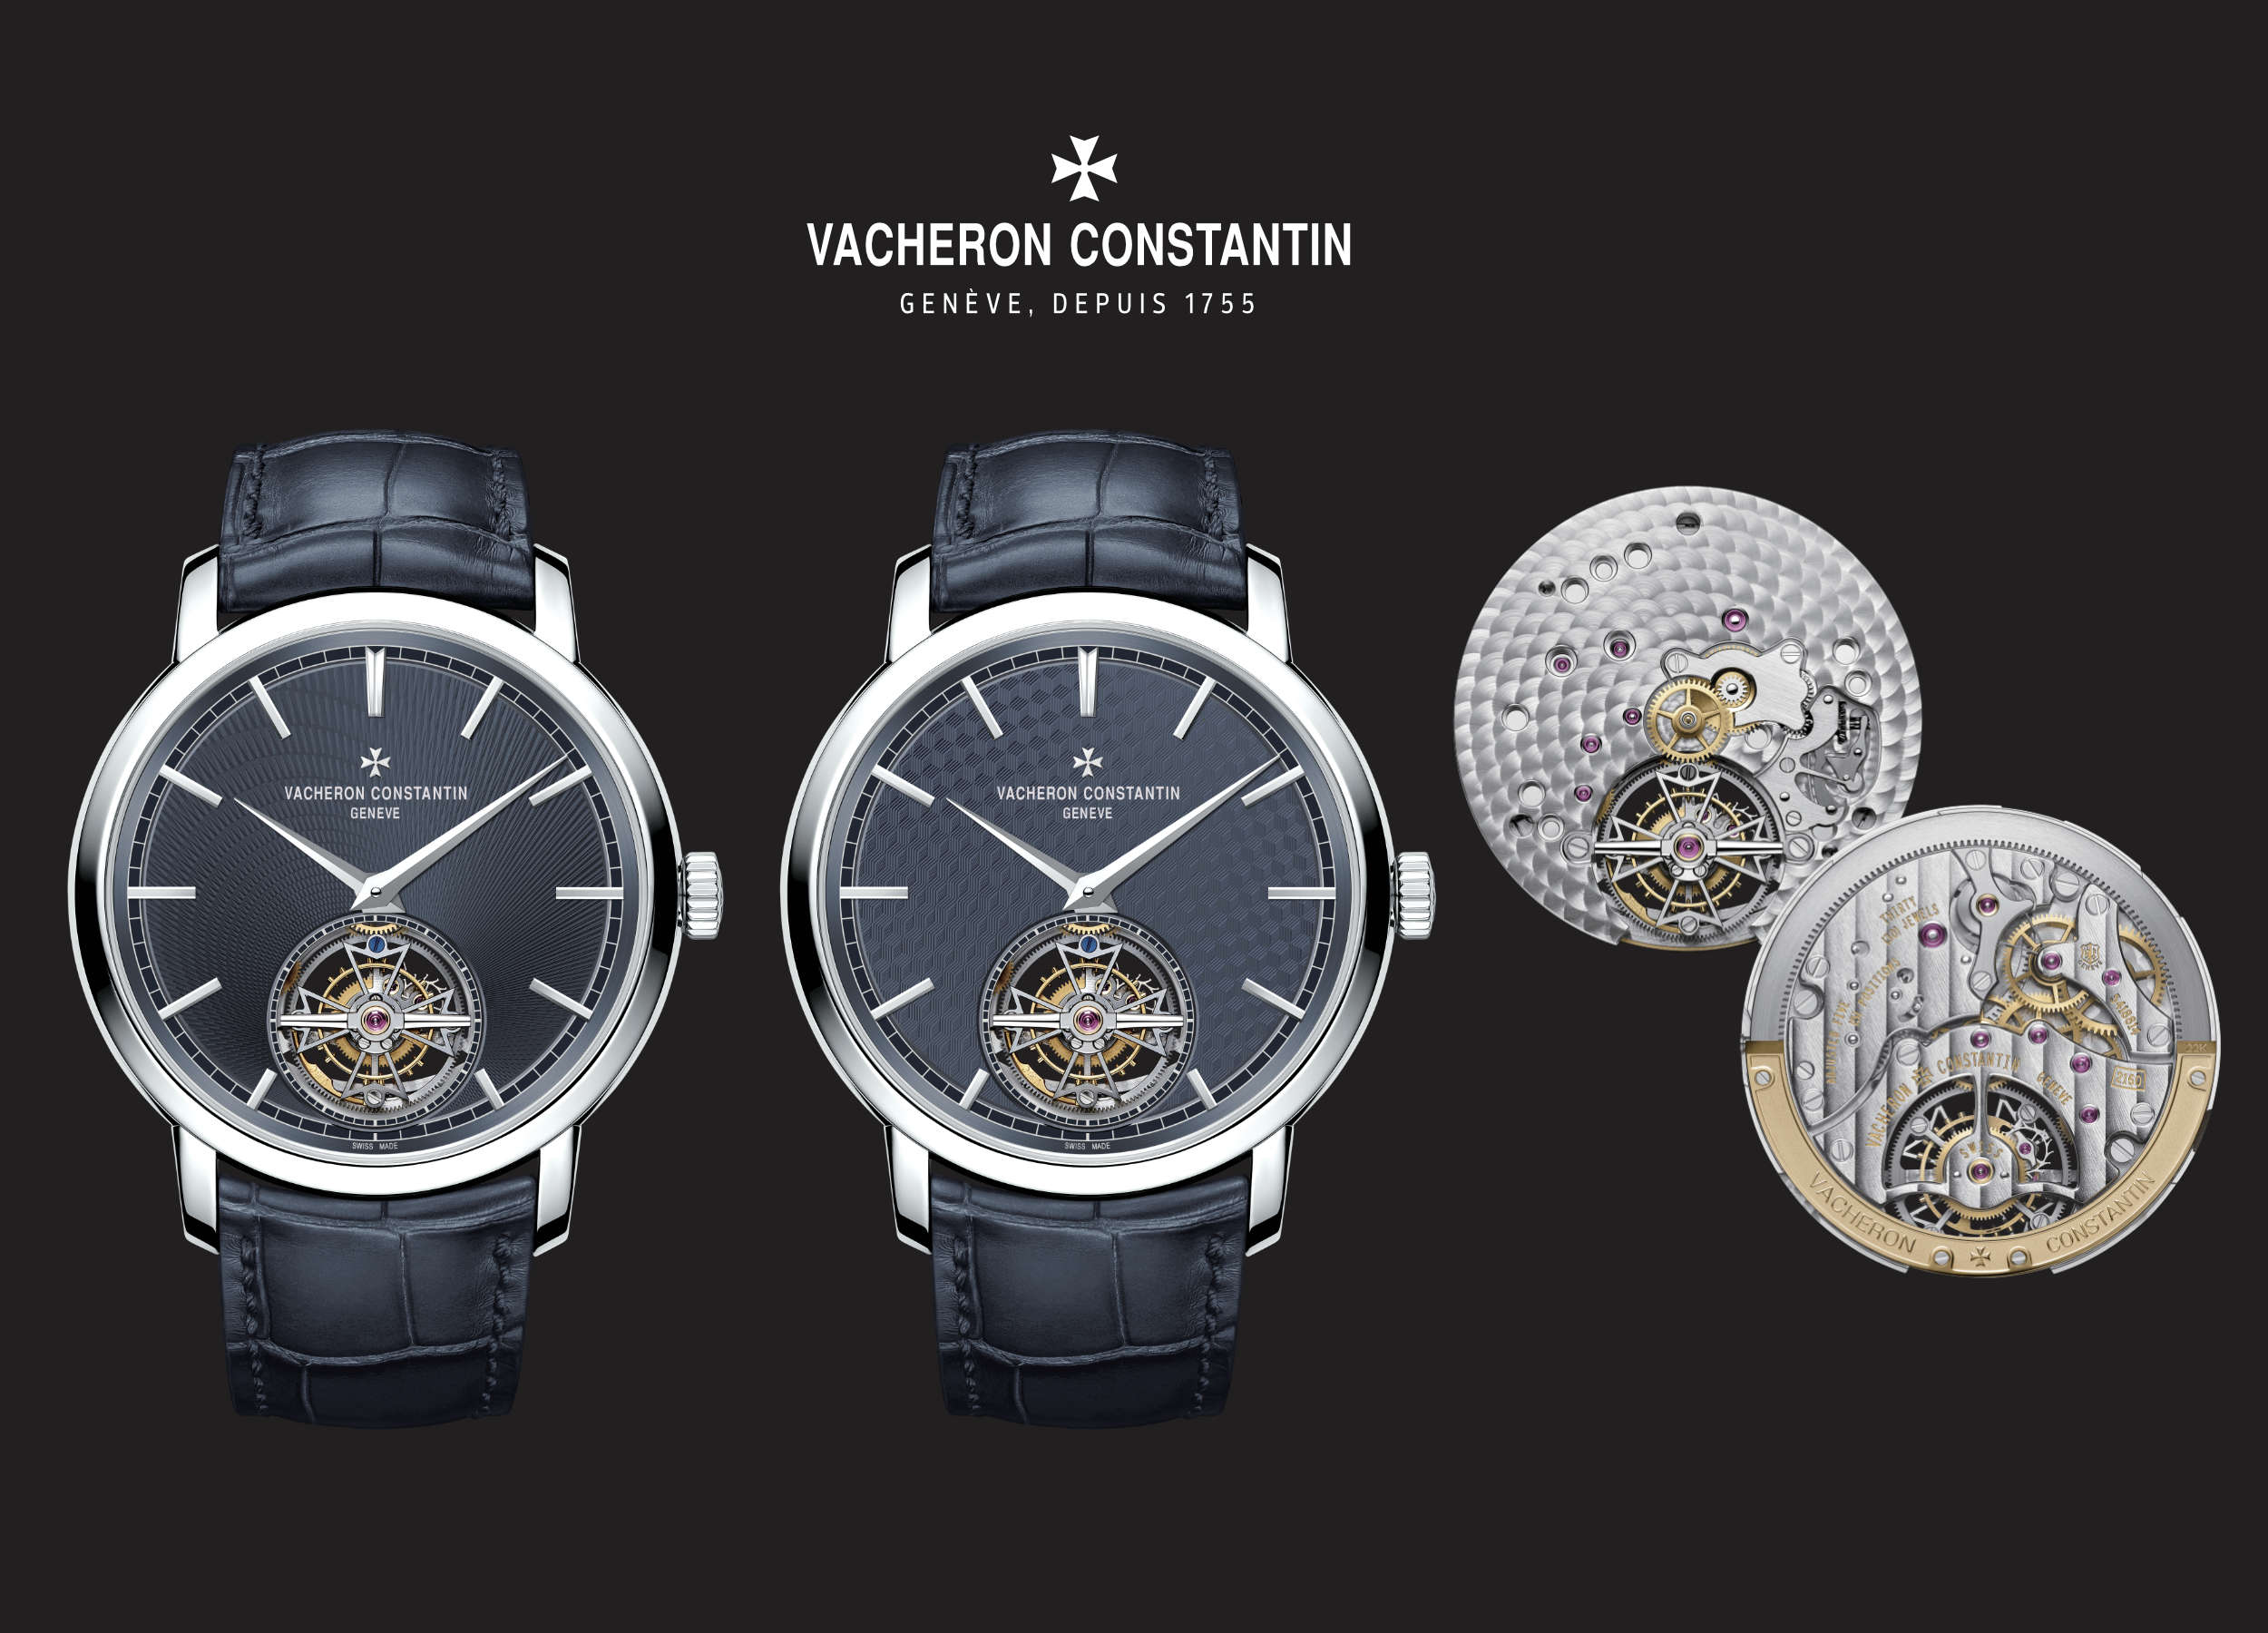 The Hour Glass x Vacheron Constantin Special Limited Edition 